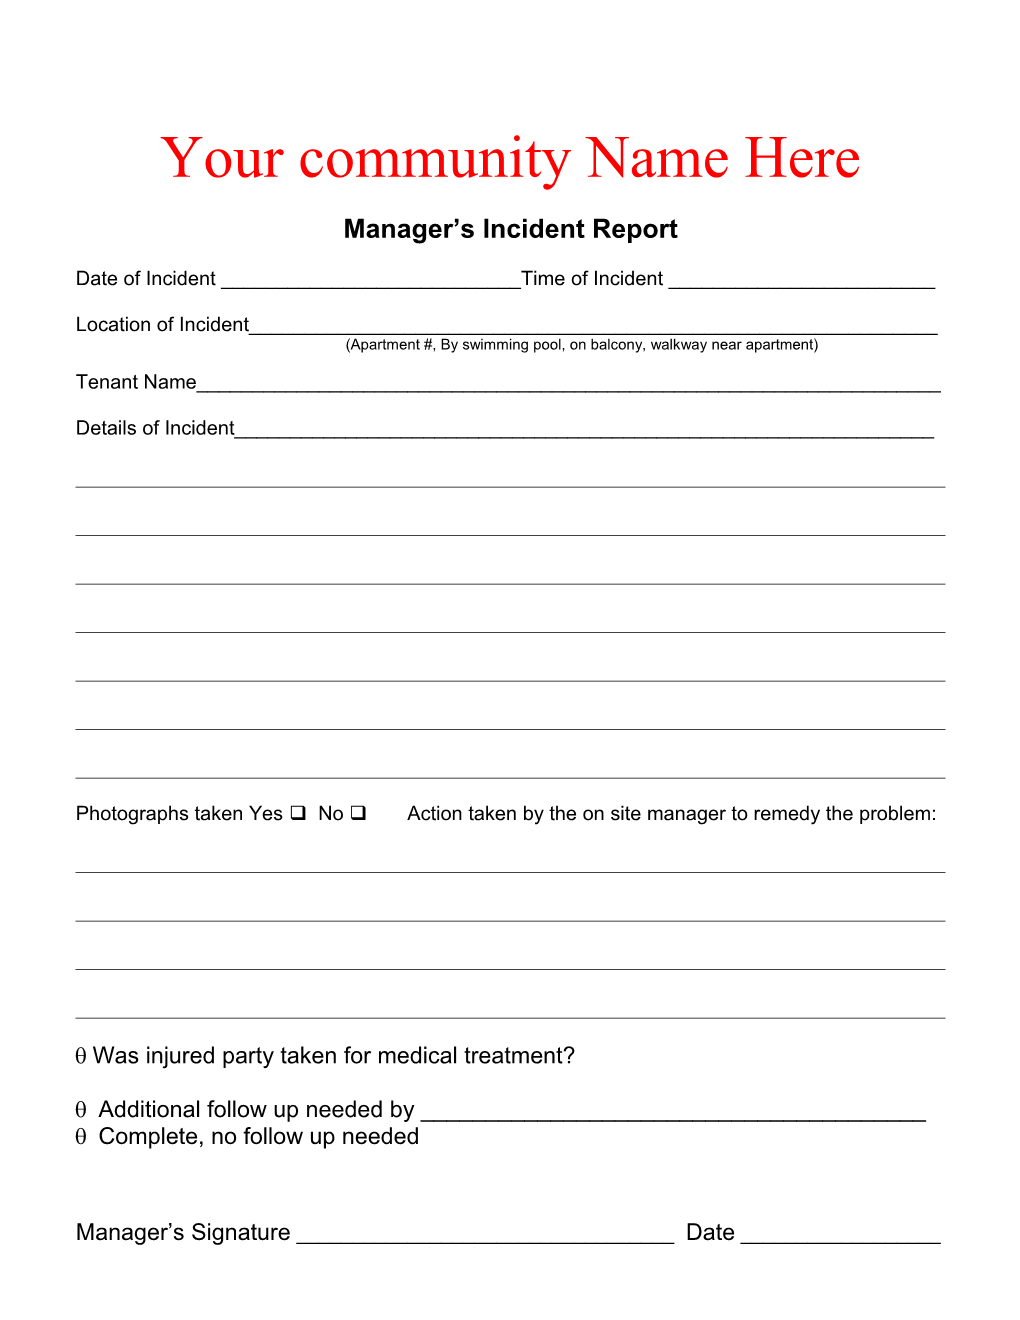 Your Community Name Here